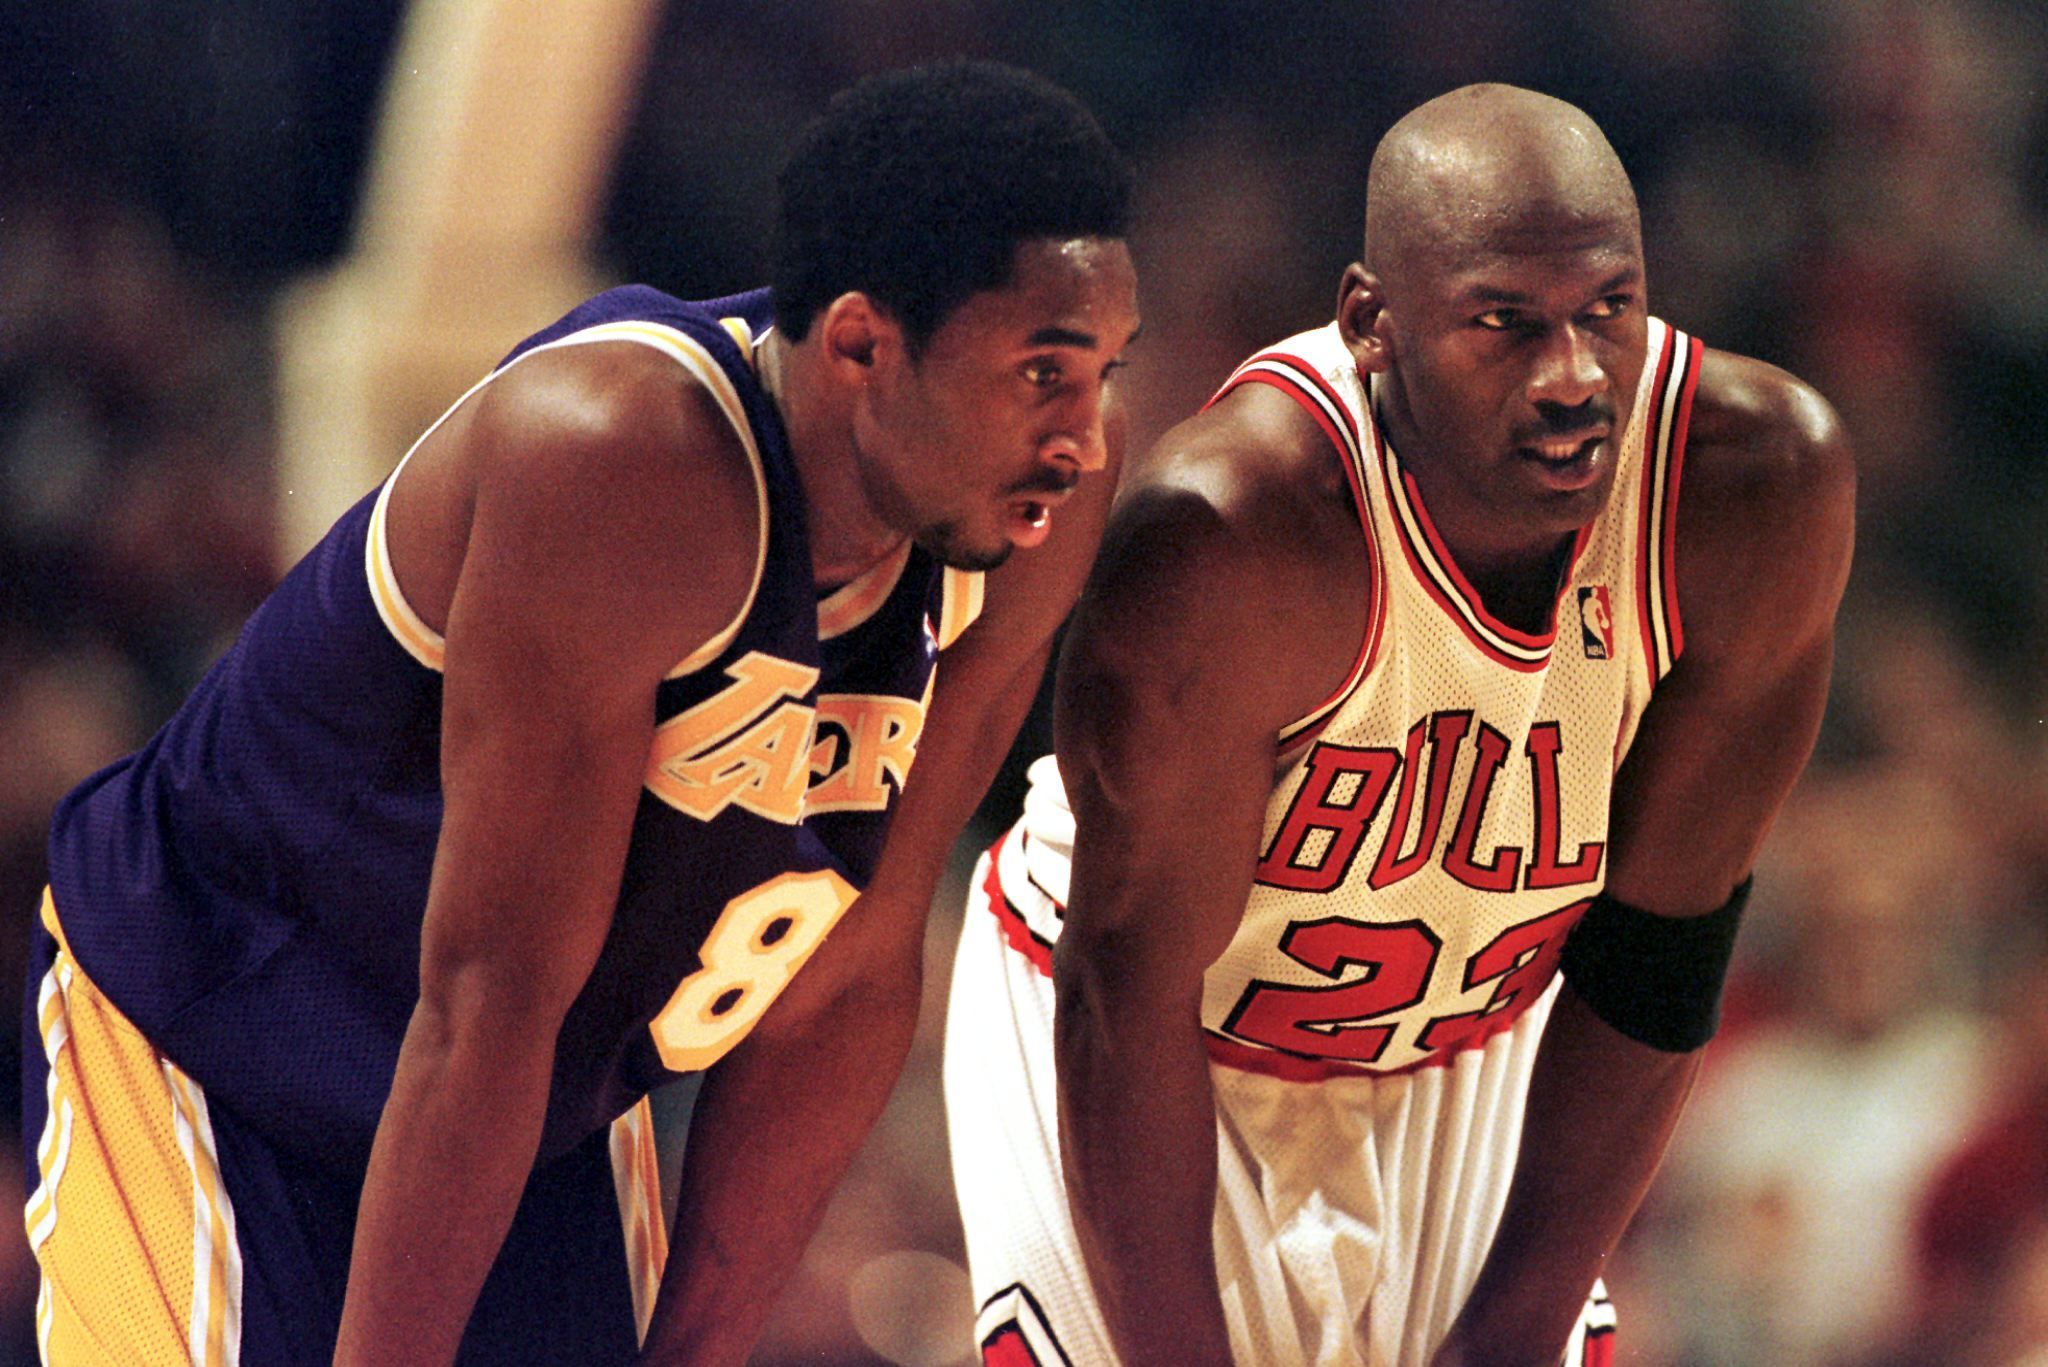 The top 25 all-time players in NBA history, according to ChatGPT